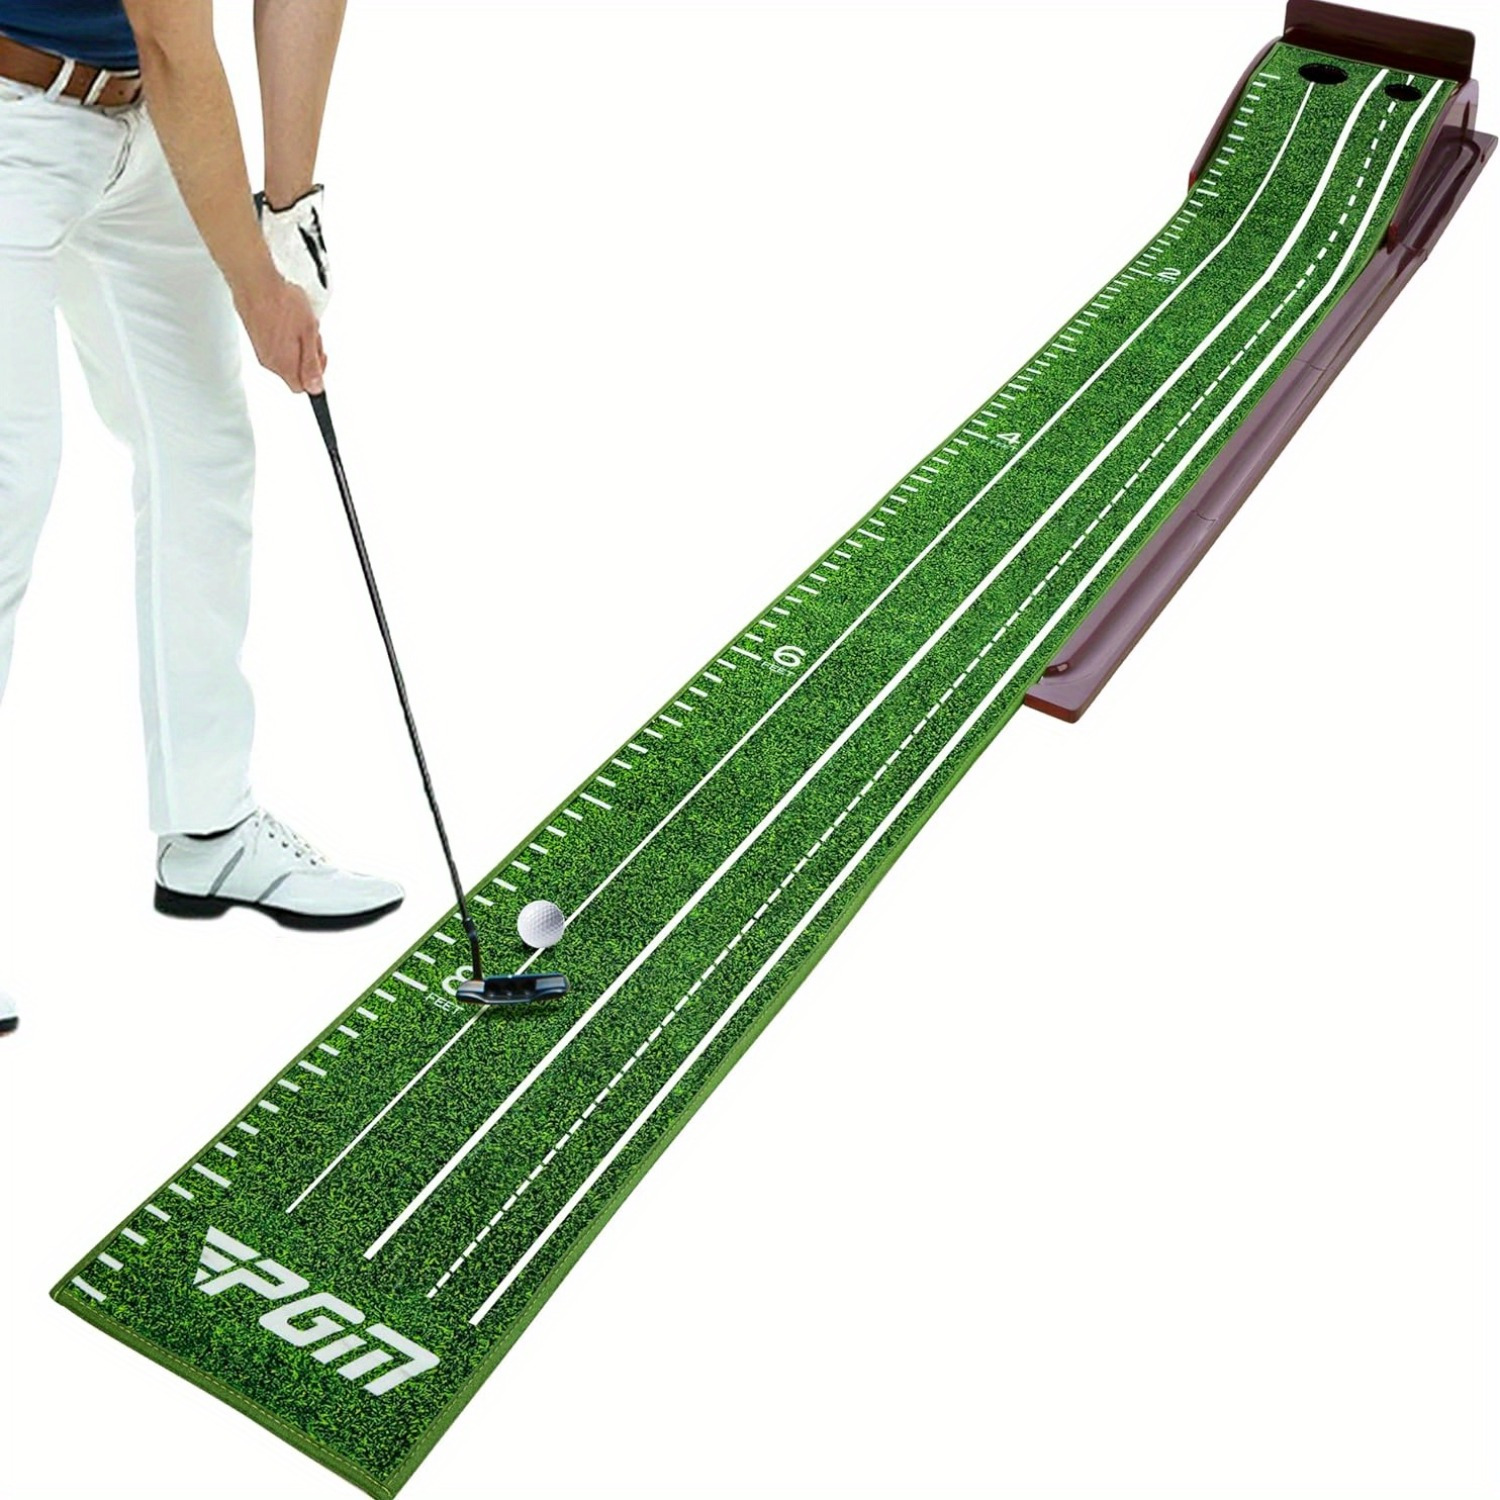 

Pgm Putting Green Indoor - Golf Putting Mat With Auto Ball Return - Crystal Velvet Putting Matt For Indoors - Golf Mats Practice Outdoor, Home And Office - Golf Accessories For Men